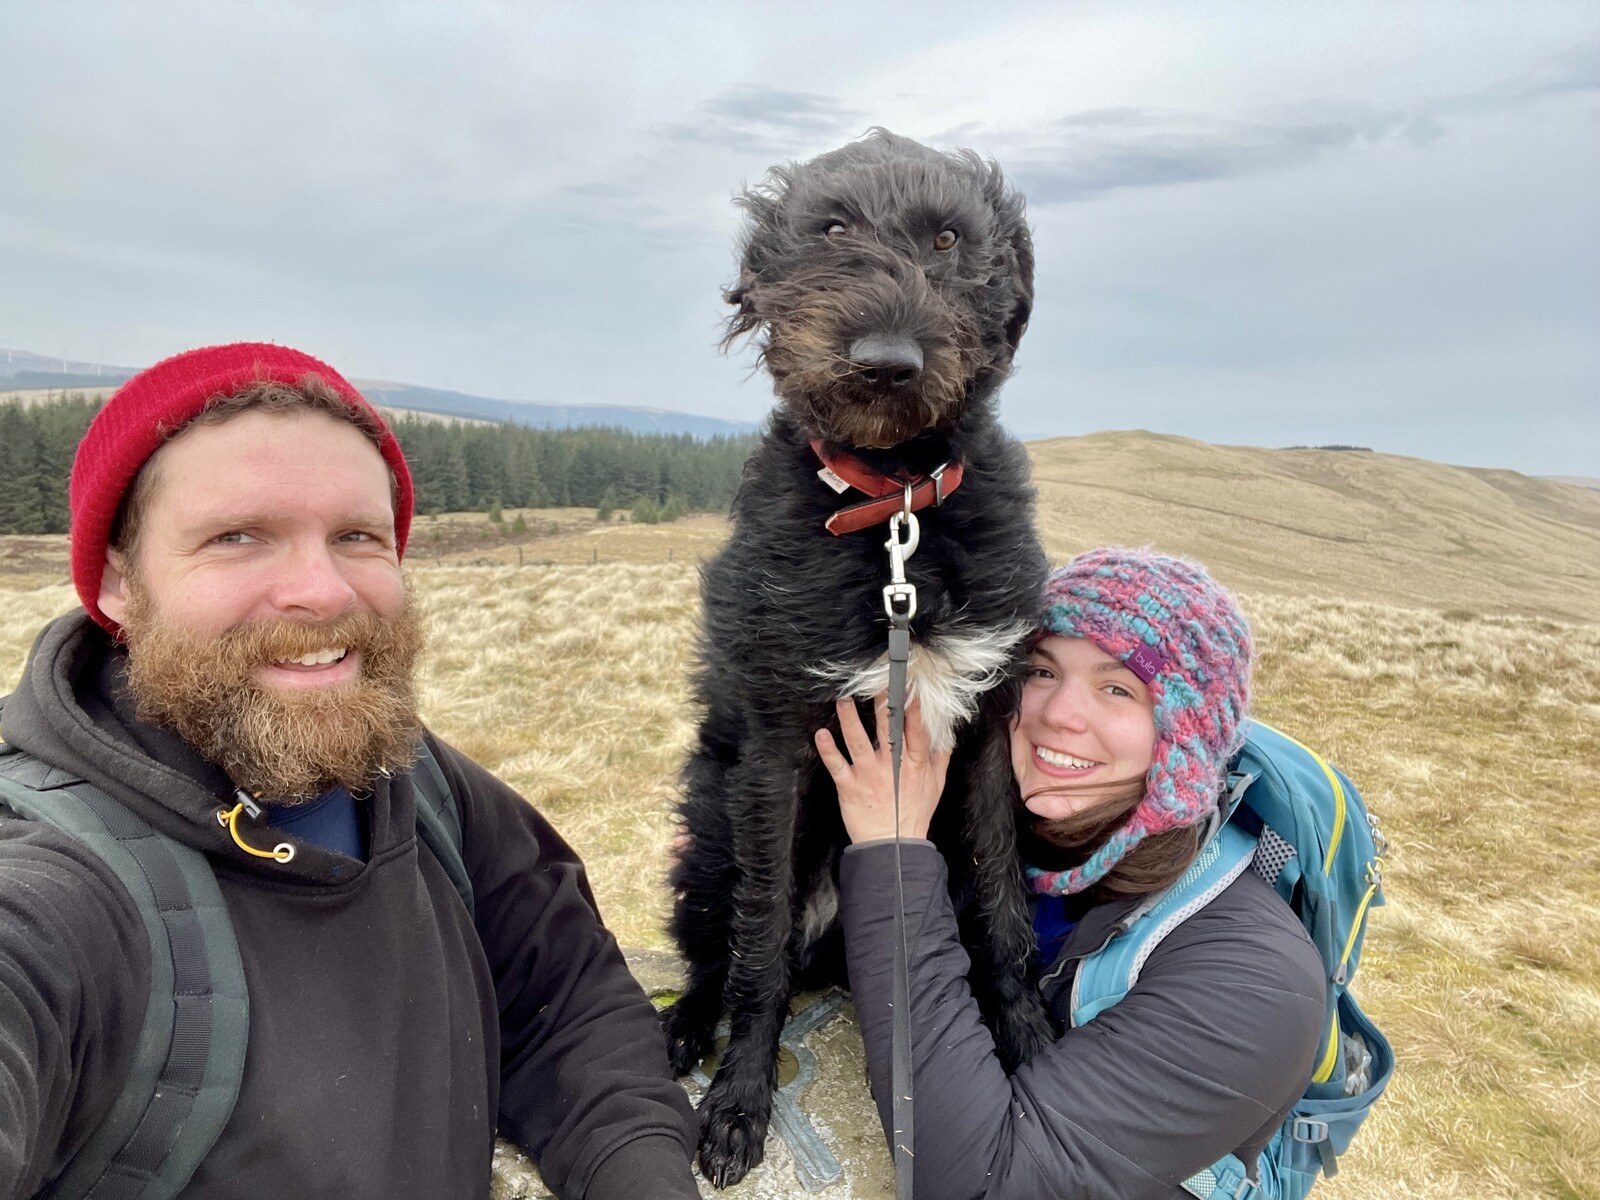 Sam, Ghyll, and me at the rim of Devil's Beef Tub near the source of the River Tweed